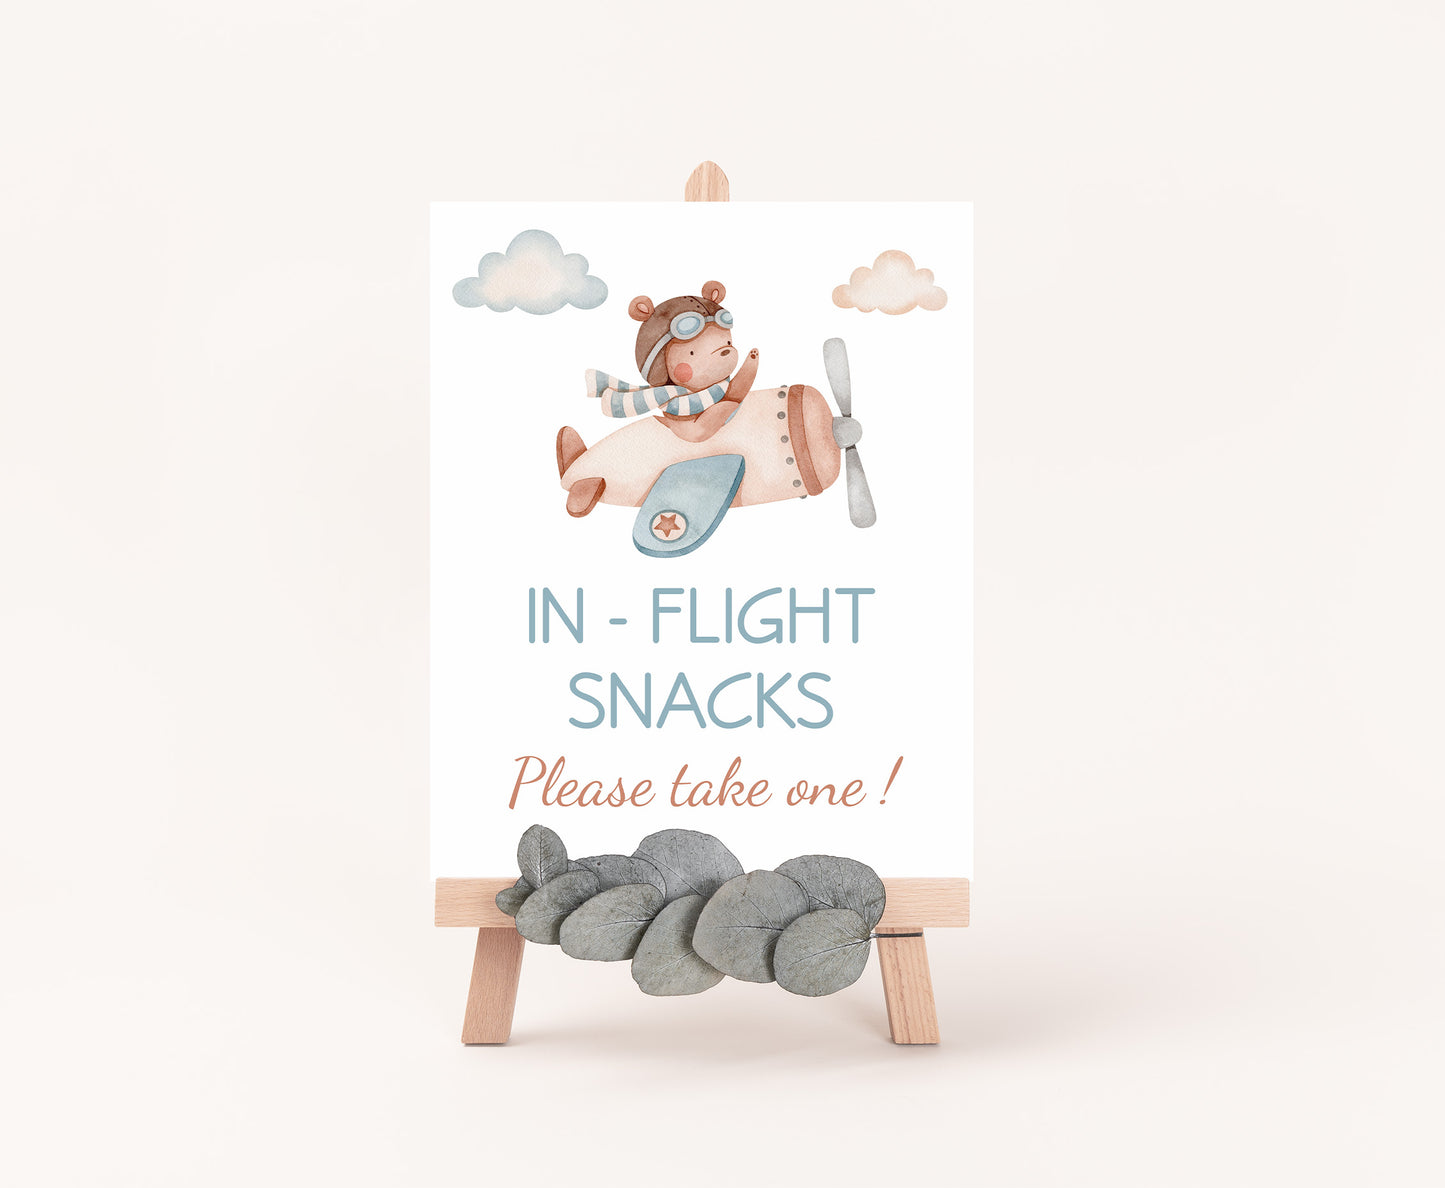 In-Flight snacksl Airplane Table Sign Printable | Aviator party Decoration - 76C